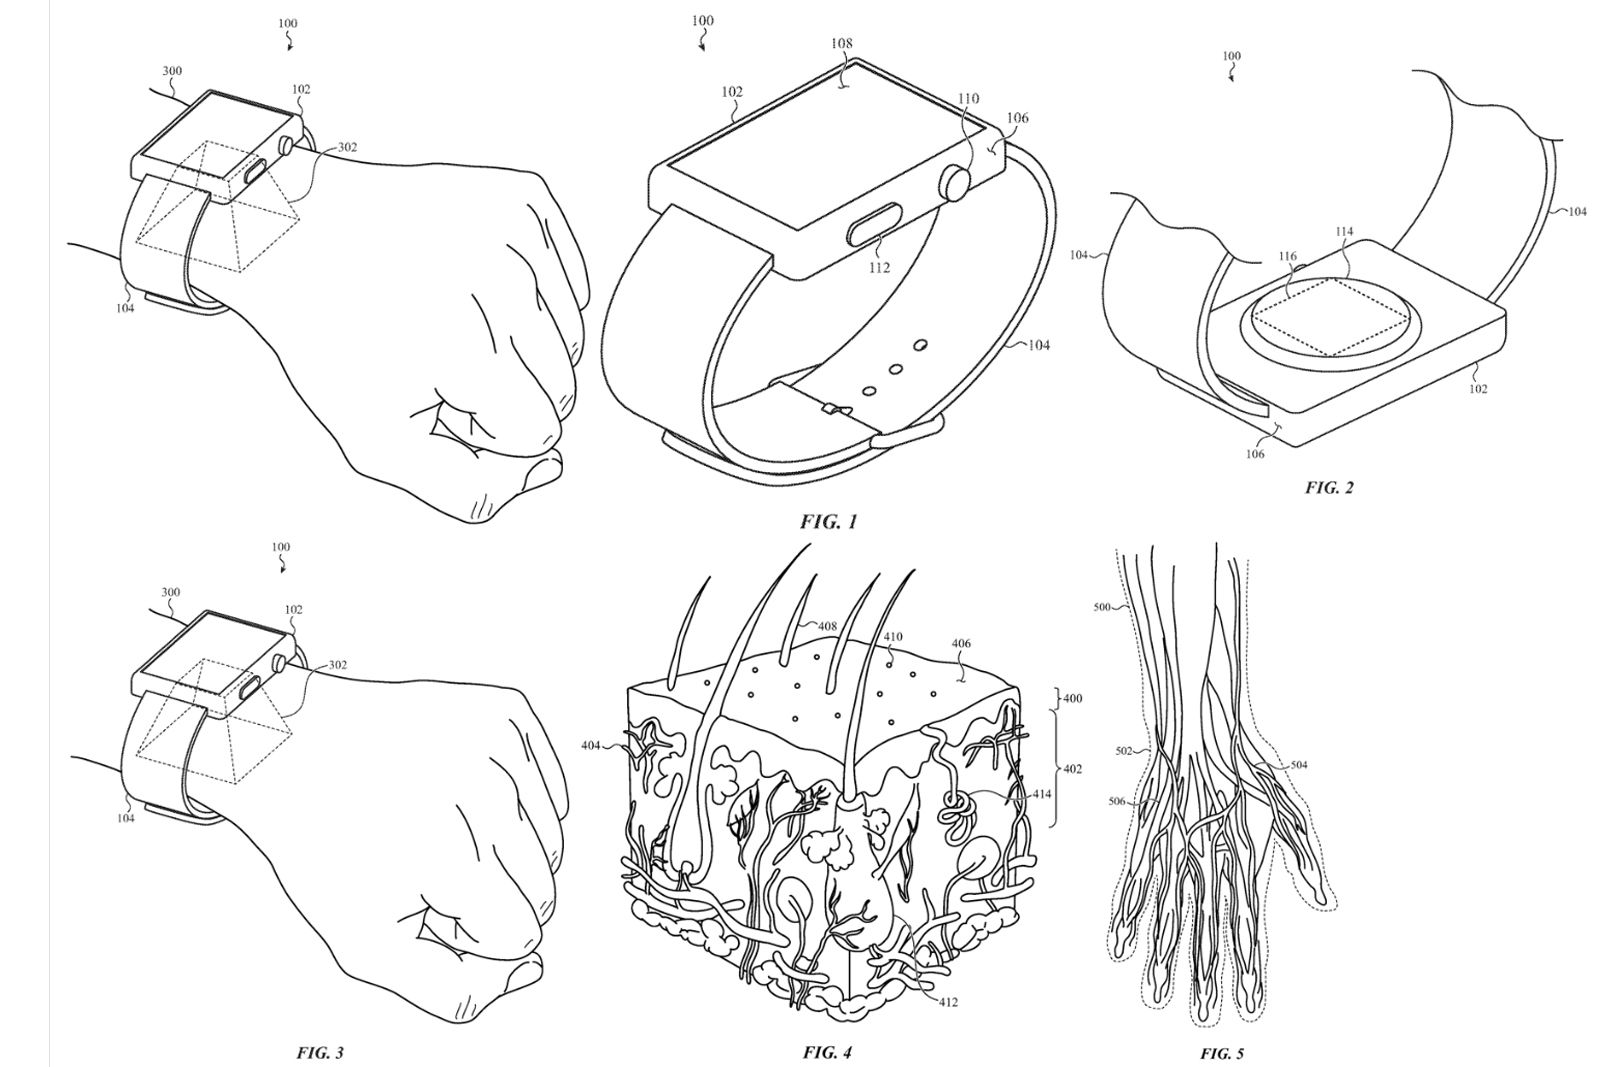 Future Apple Watch could have Wrist ID, patent suggests photo 3